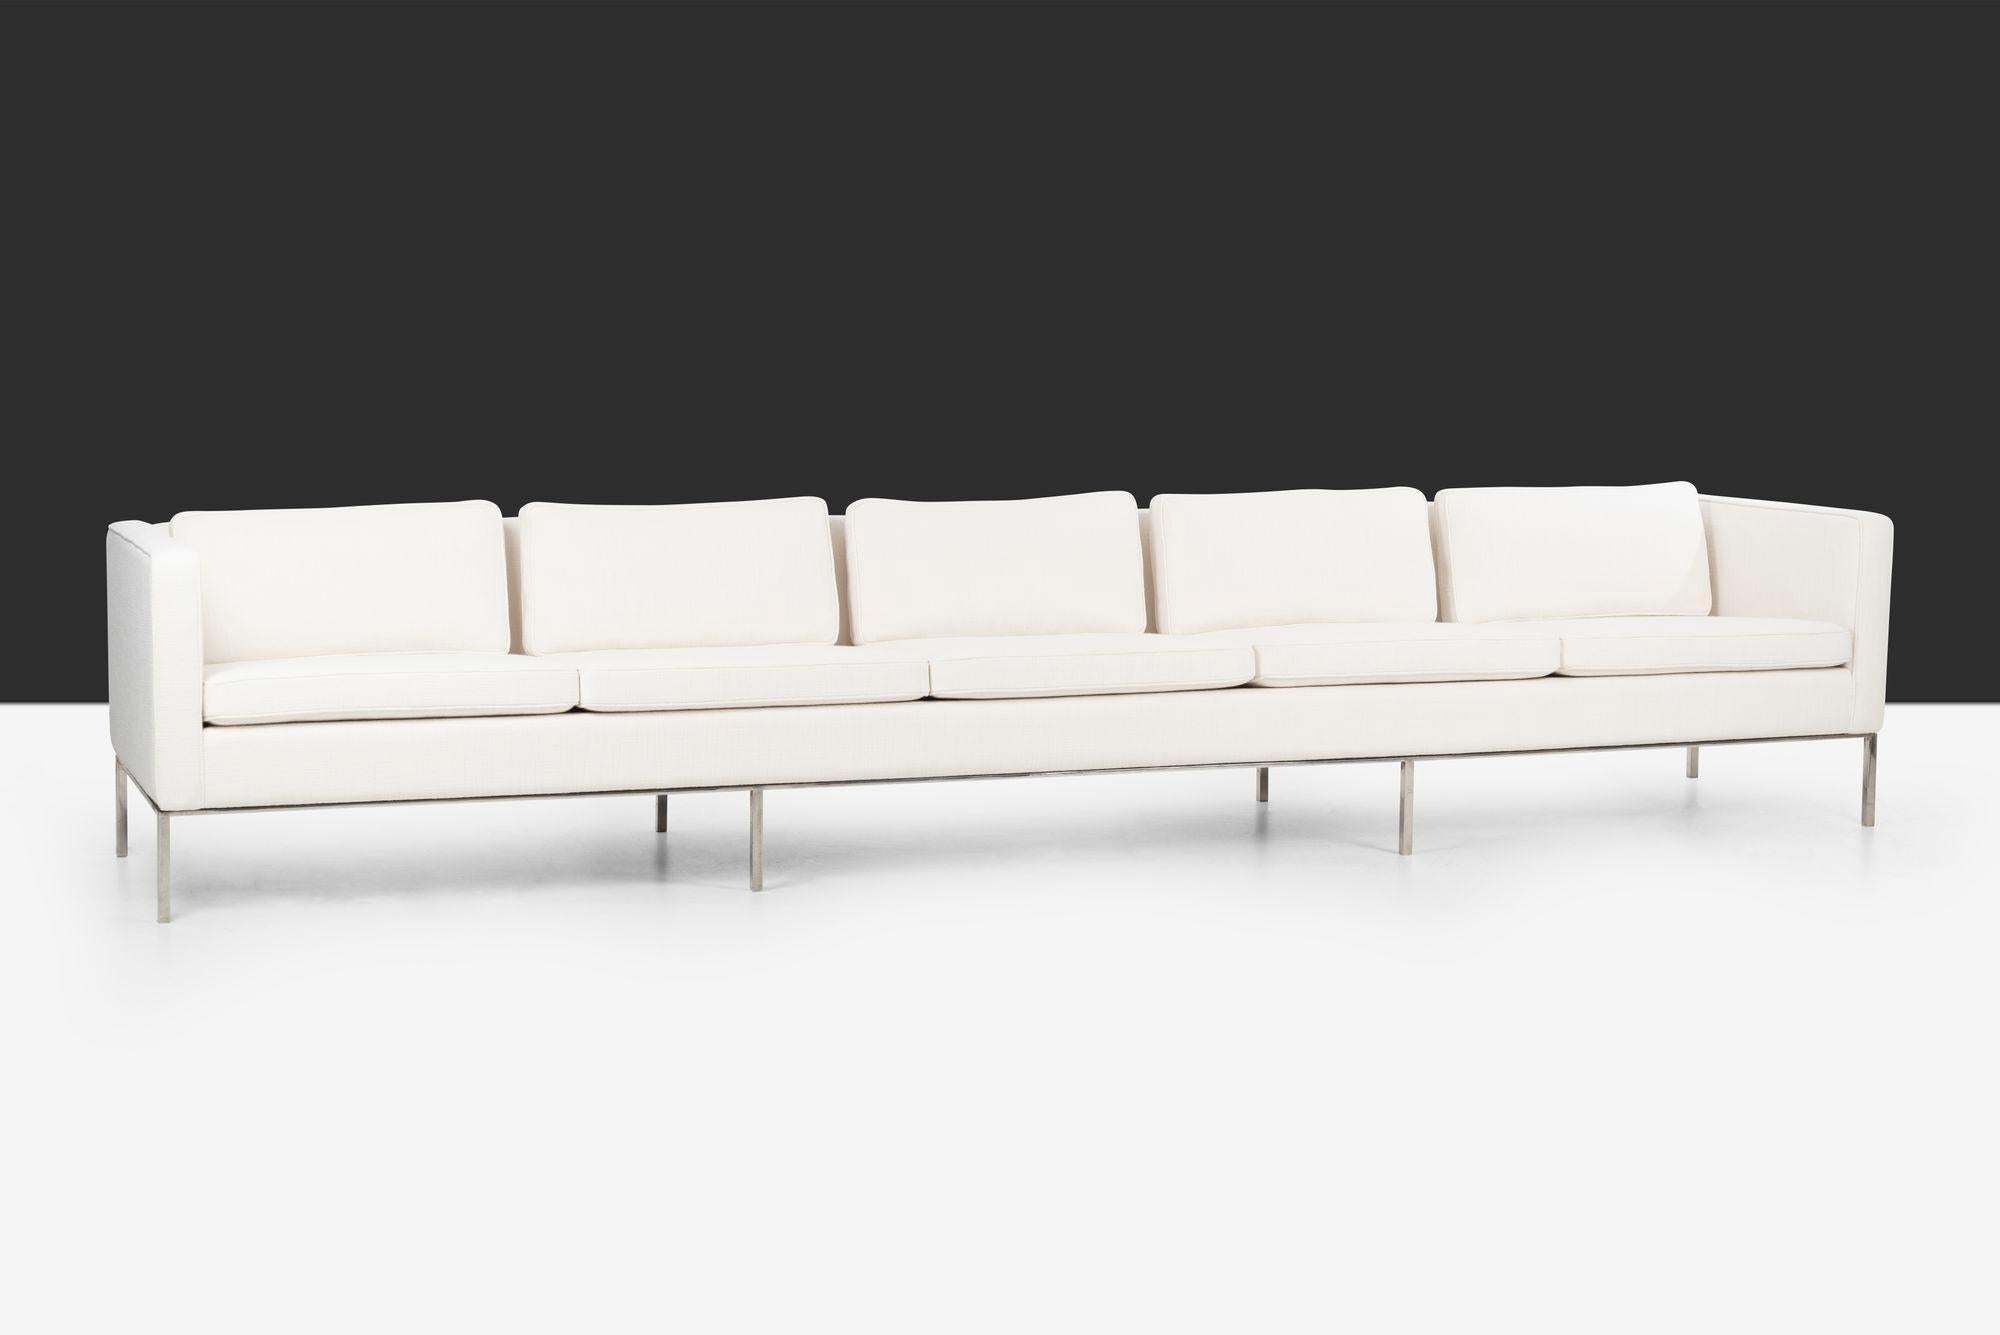 William Armbruster Monumental five-seat sofa for Chase Manhattan Executive Offices.
A generous 144